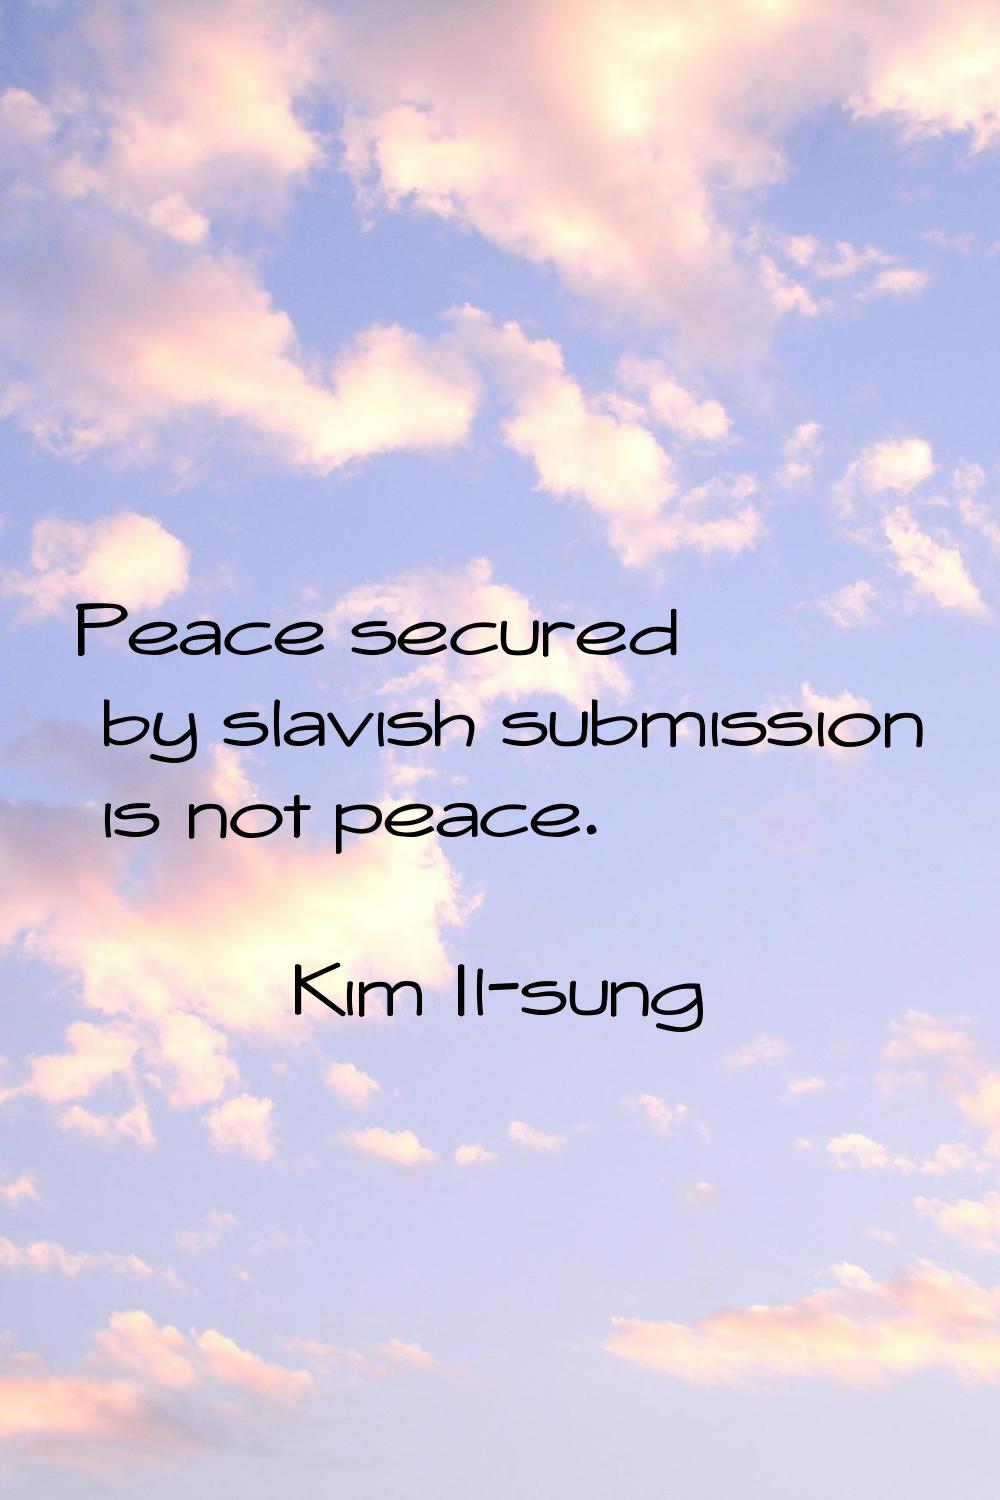 Peace secured by slavish submission is not peace.